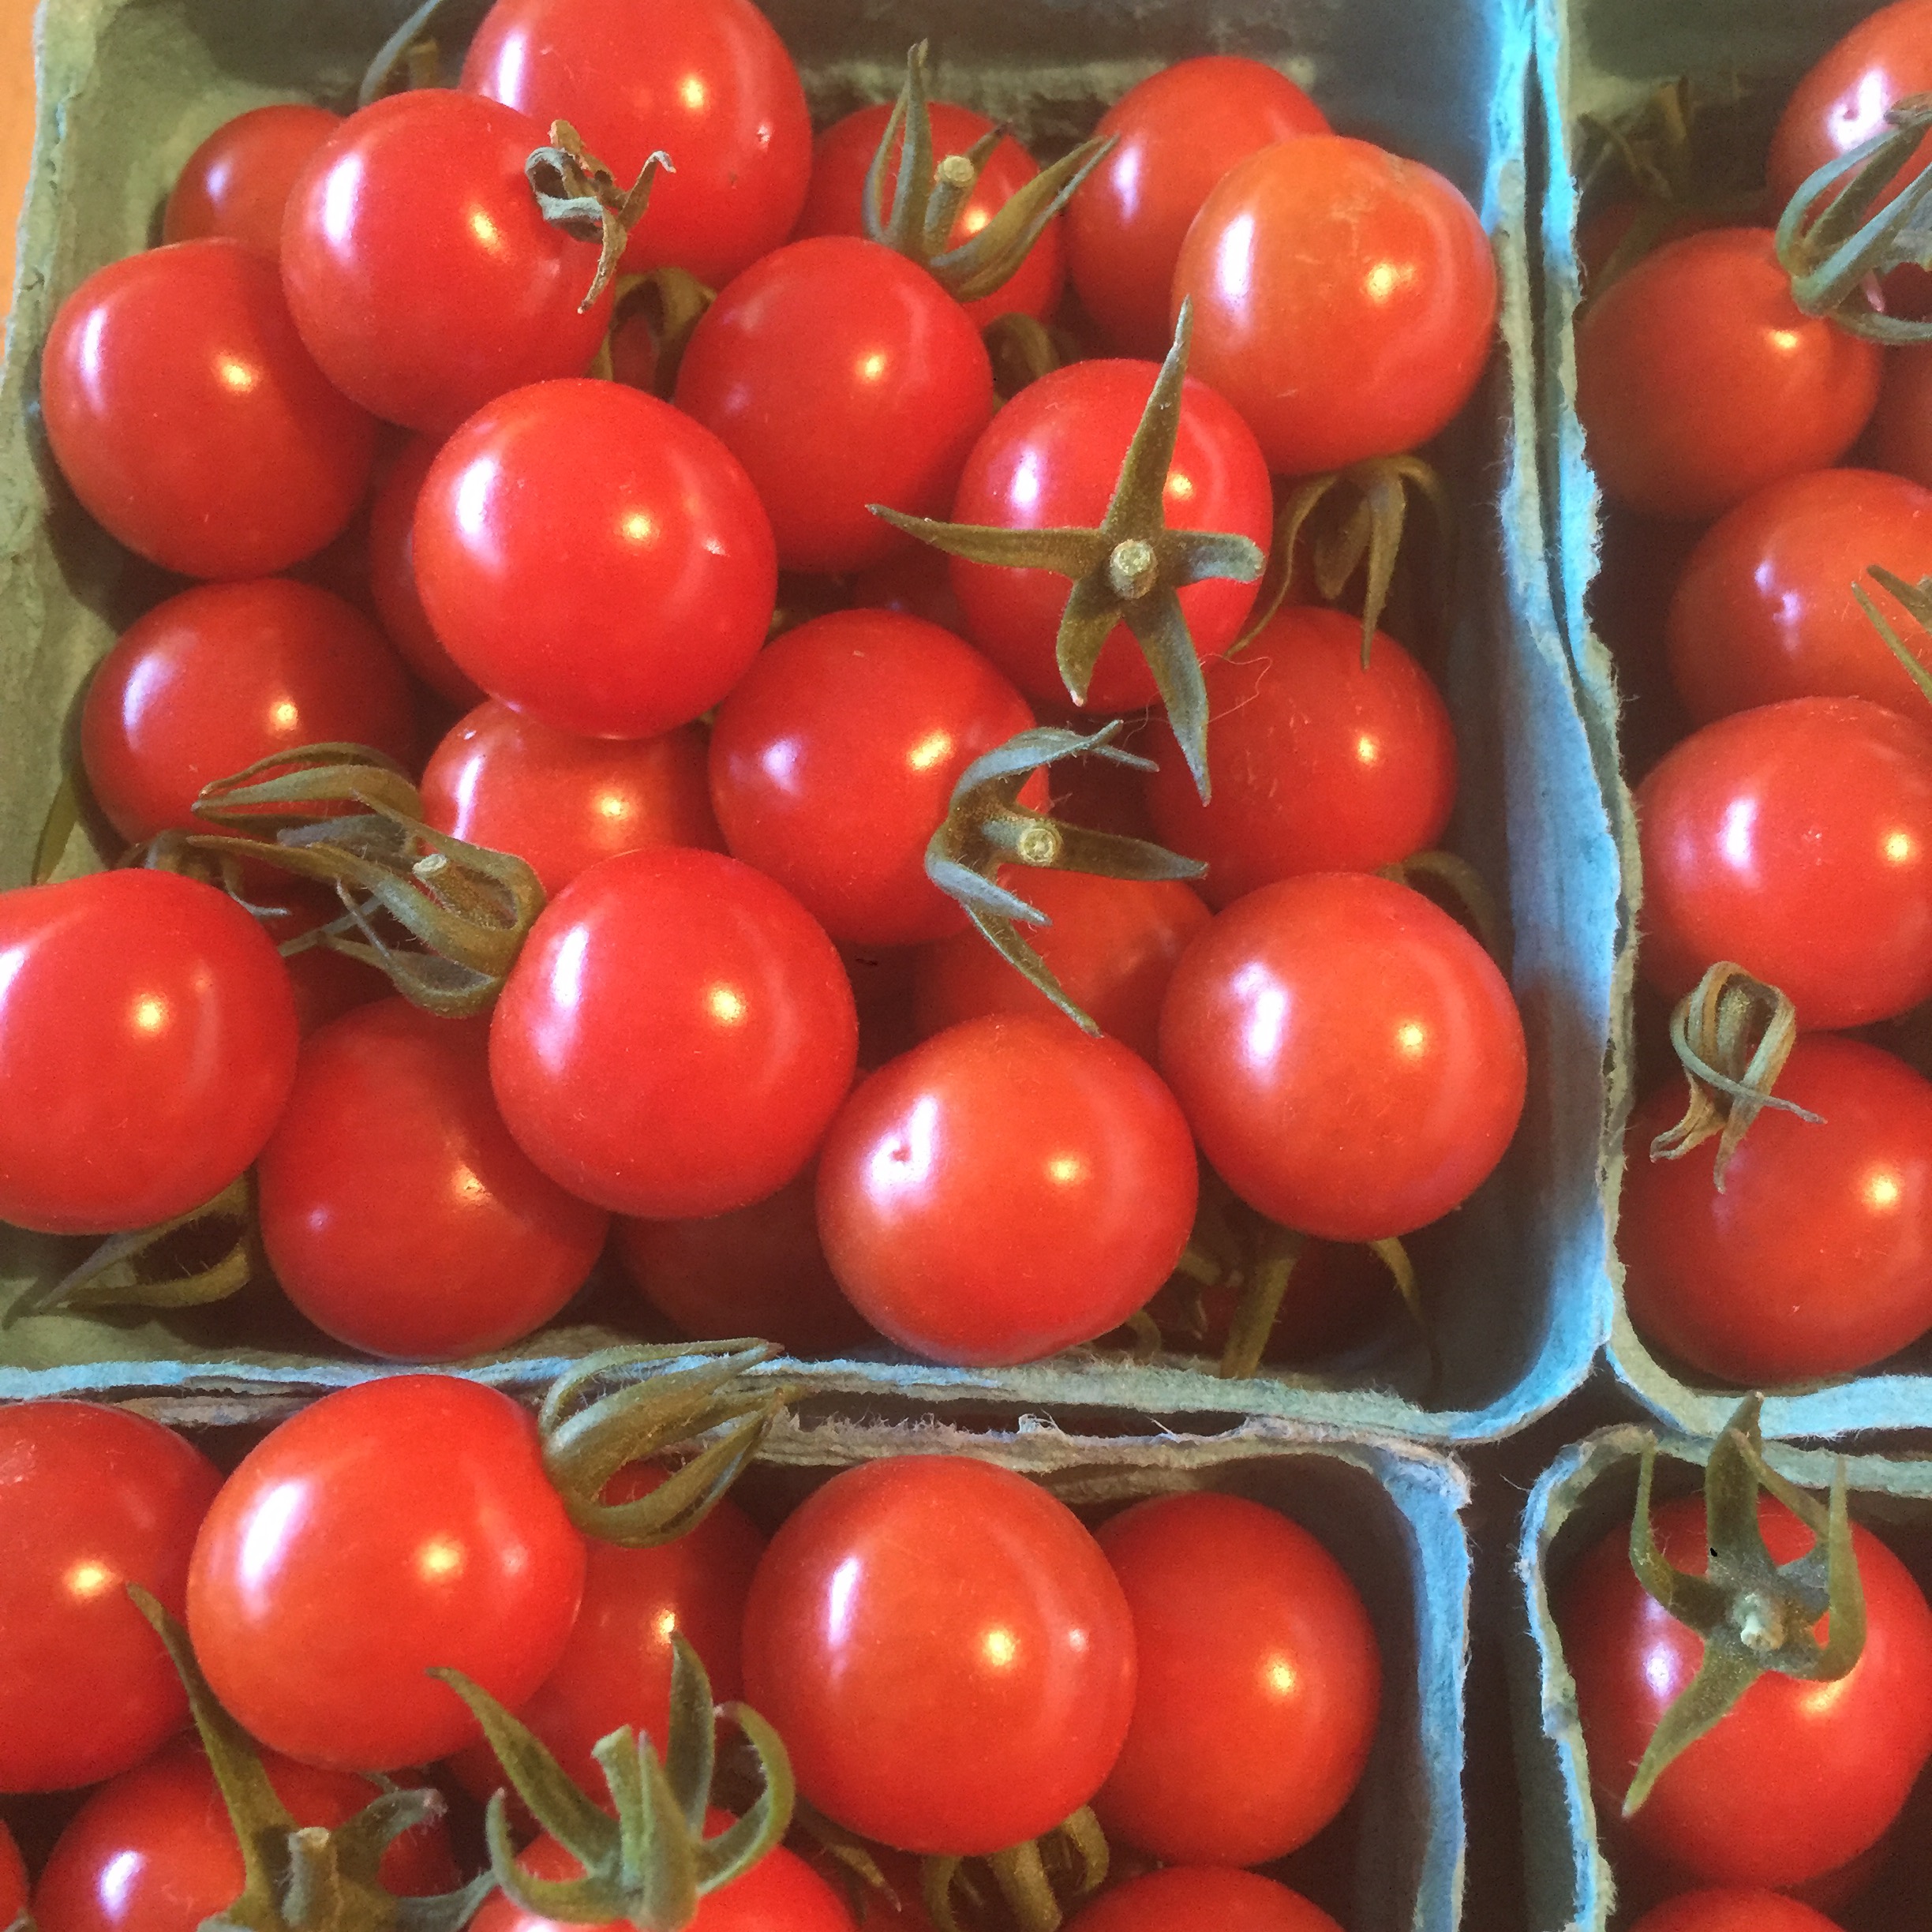  Our red cherry tomatoes are pretty good too.   